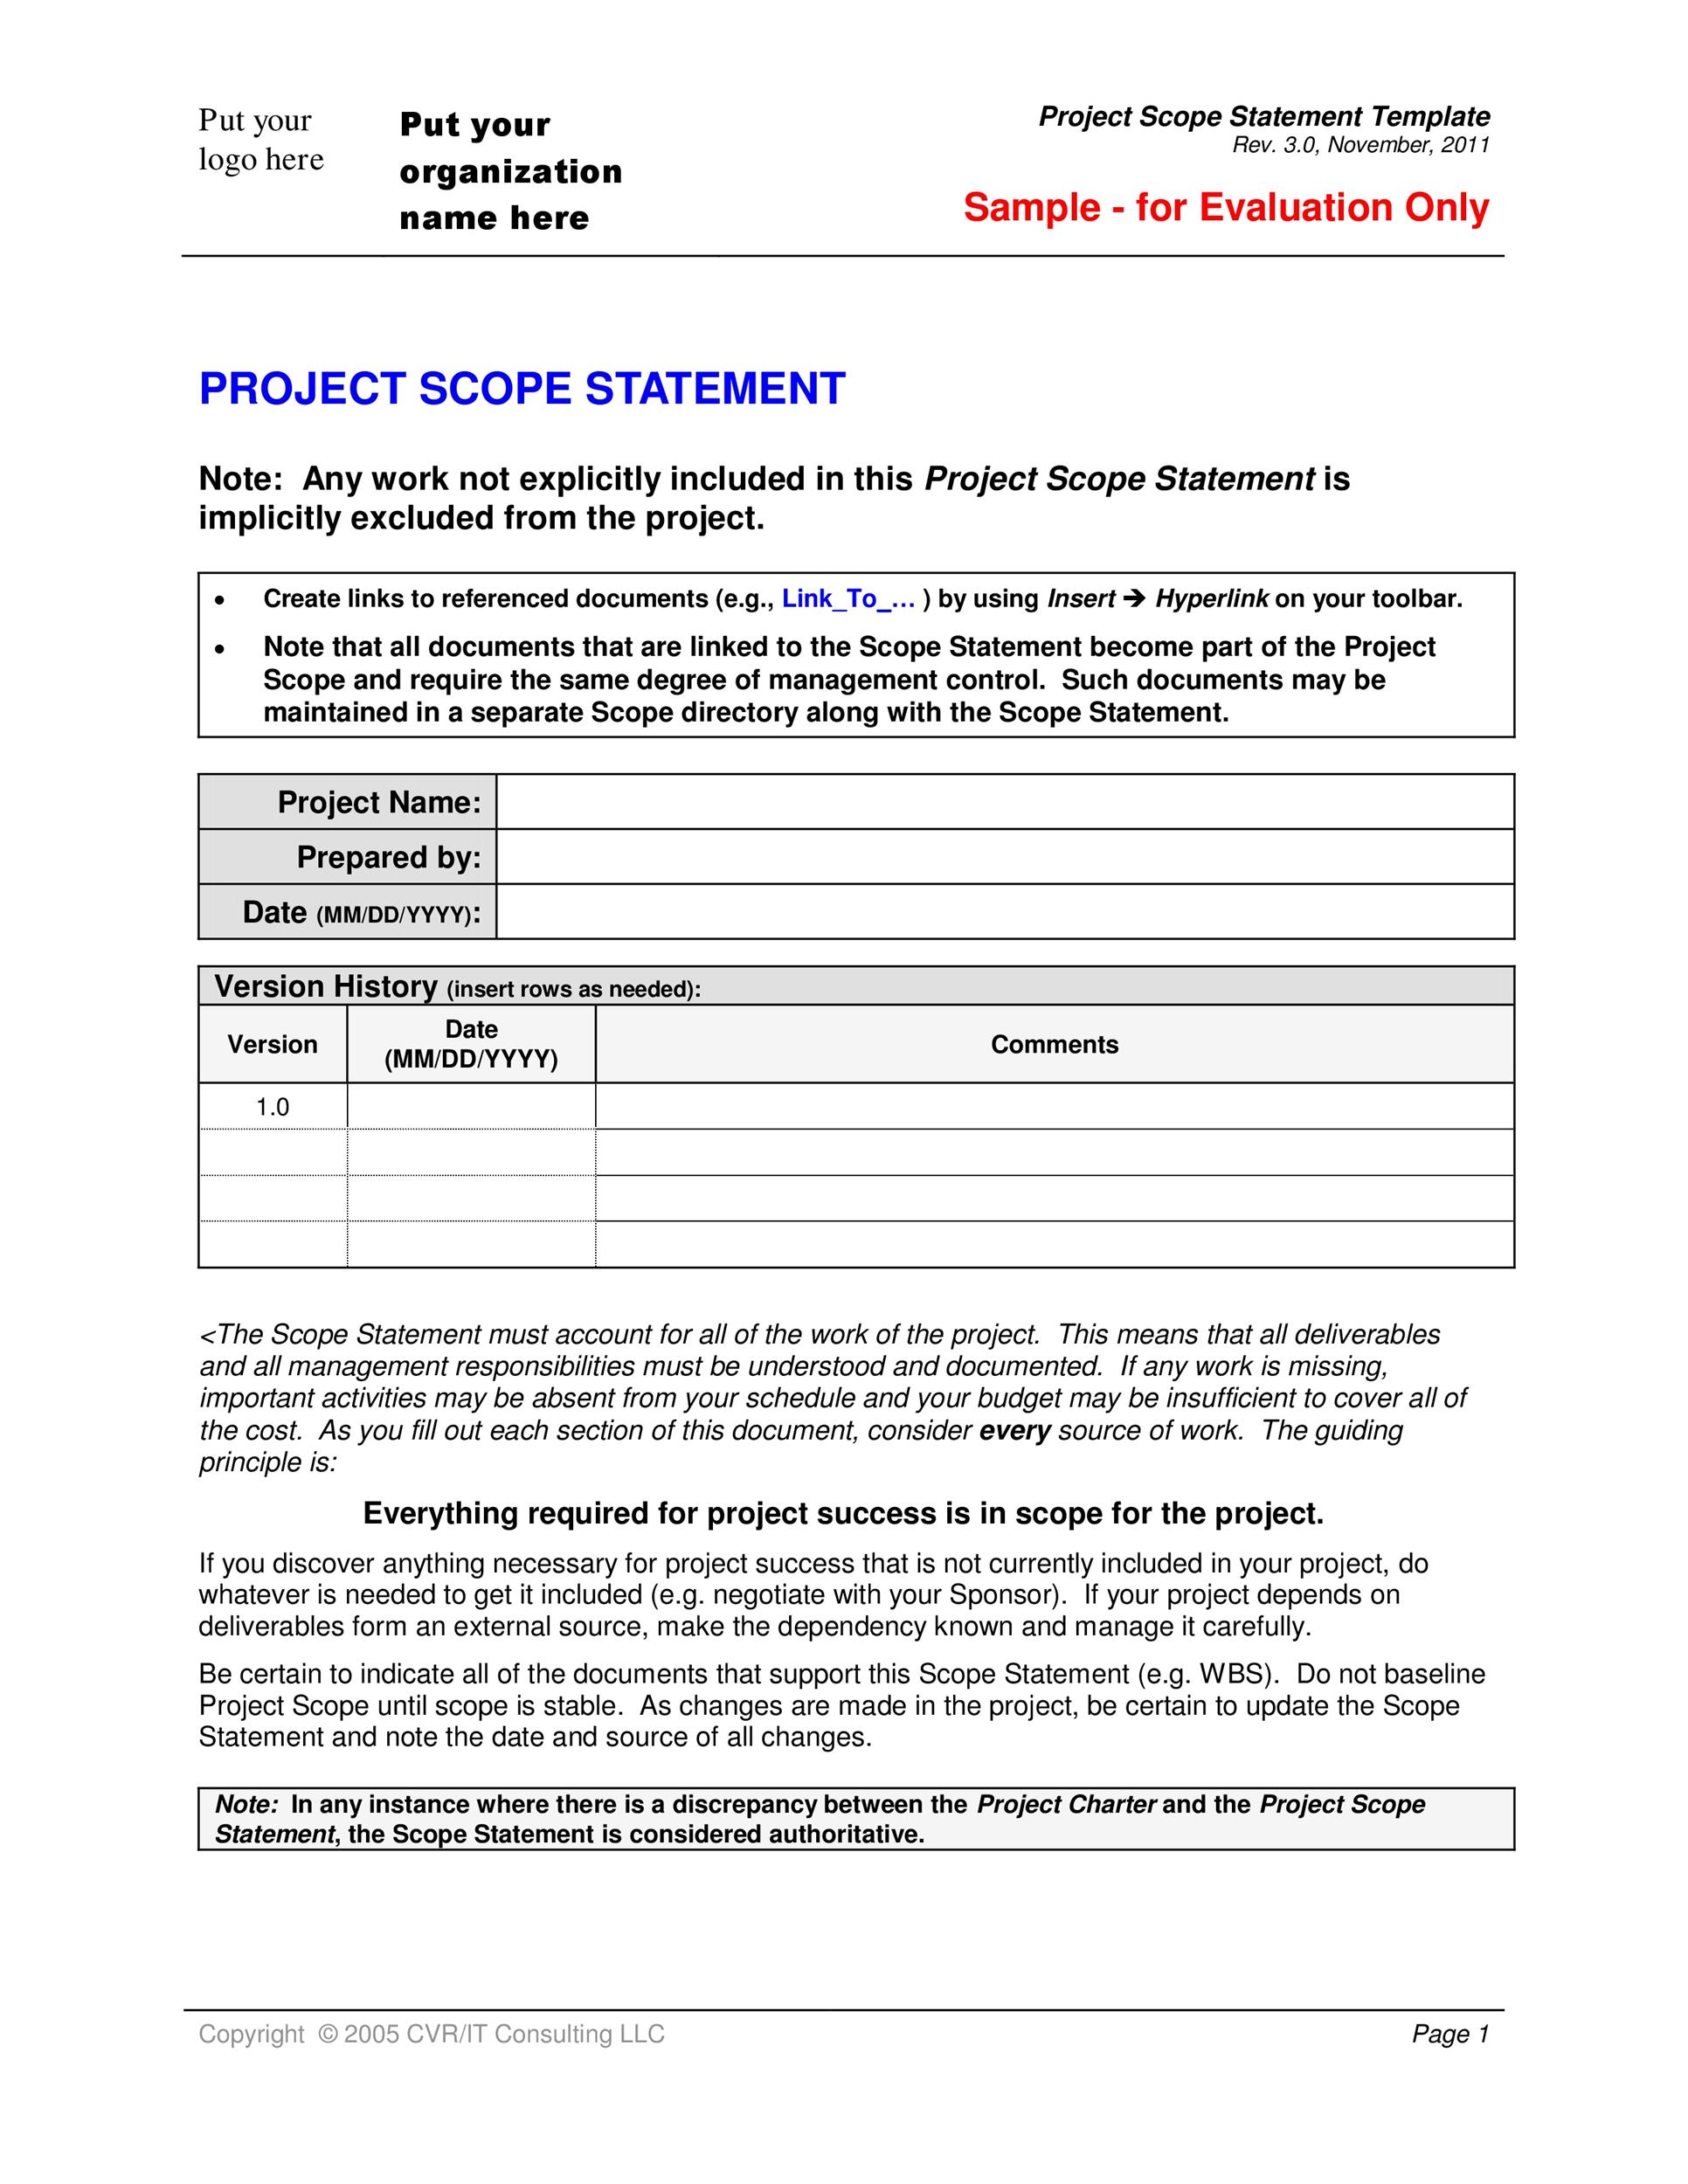 Project Scope Statement Template Word